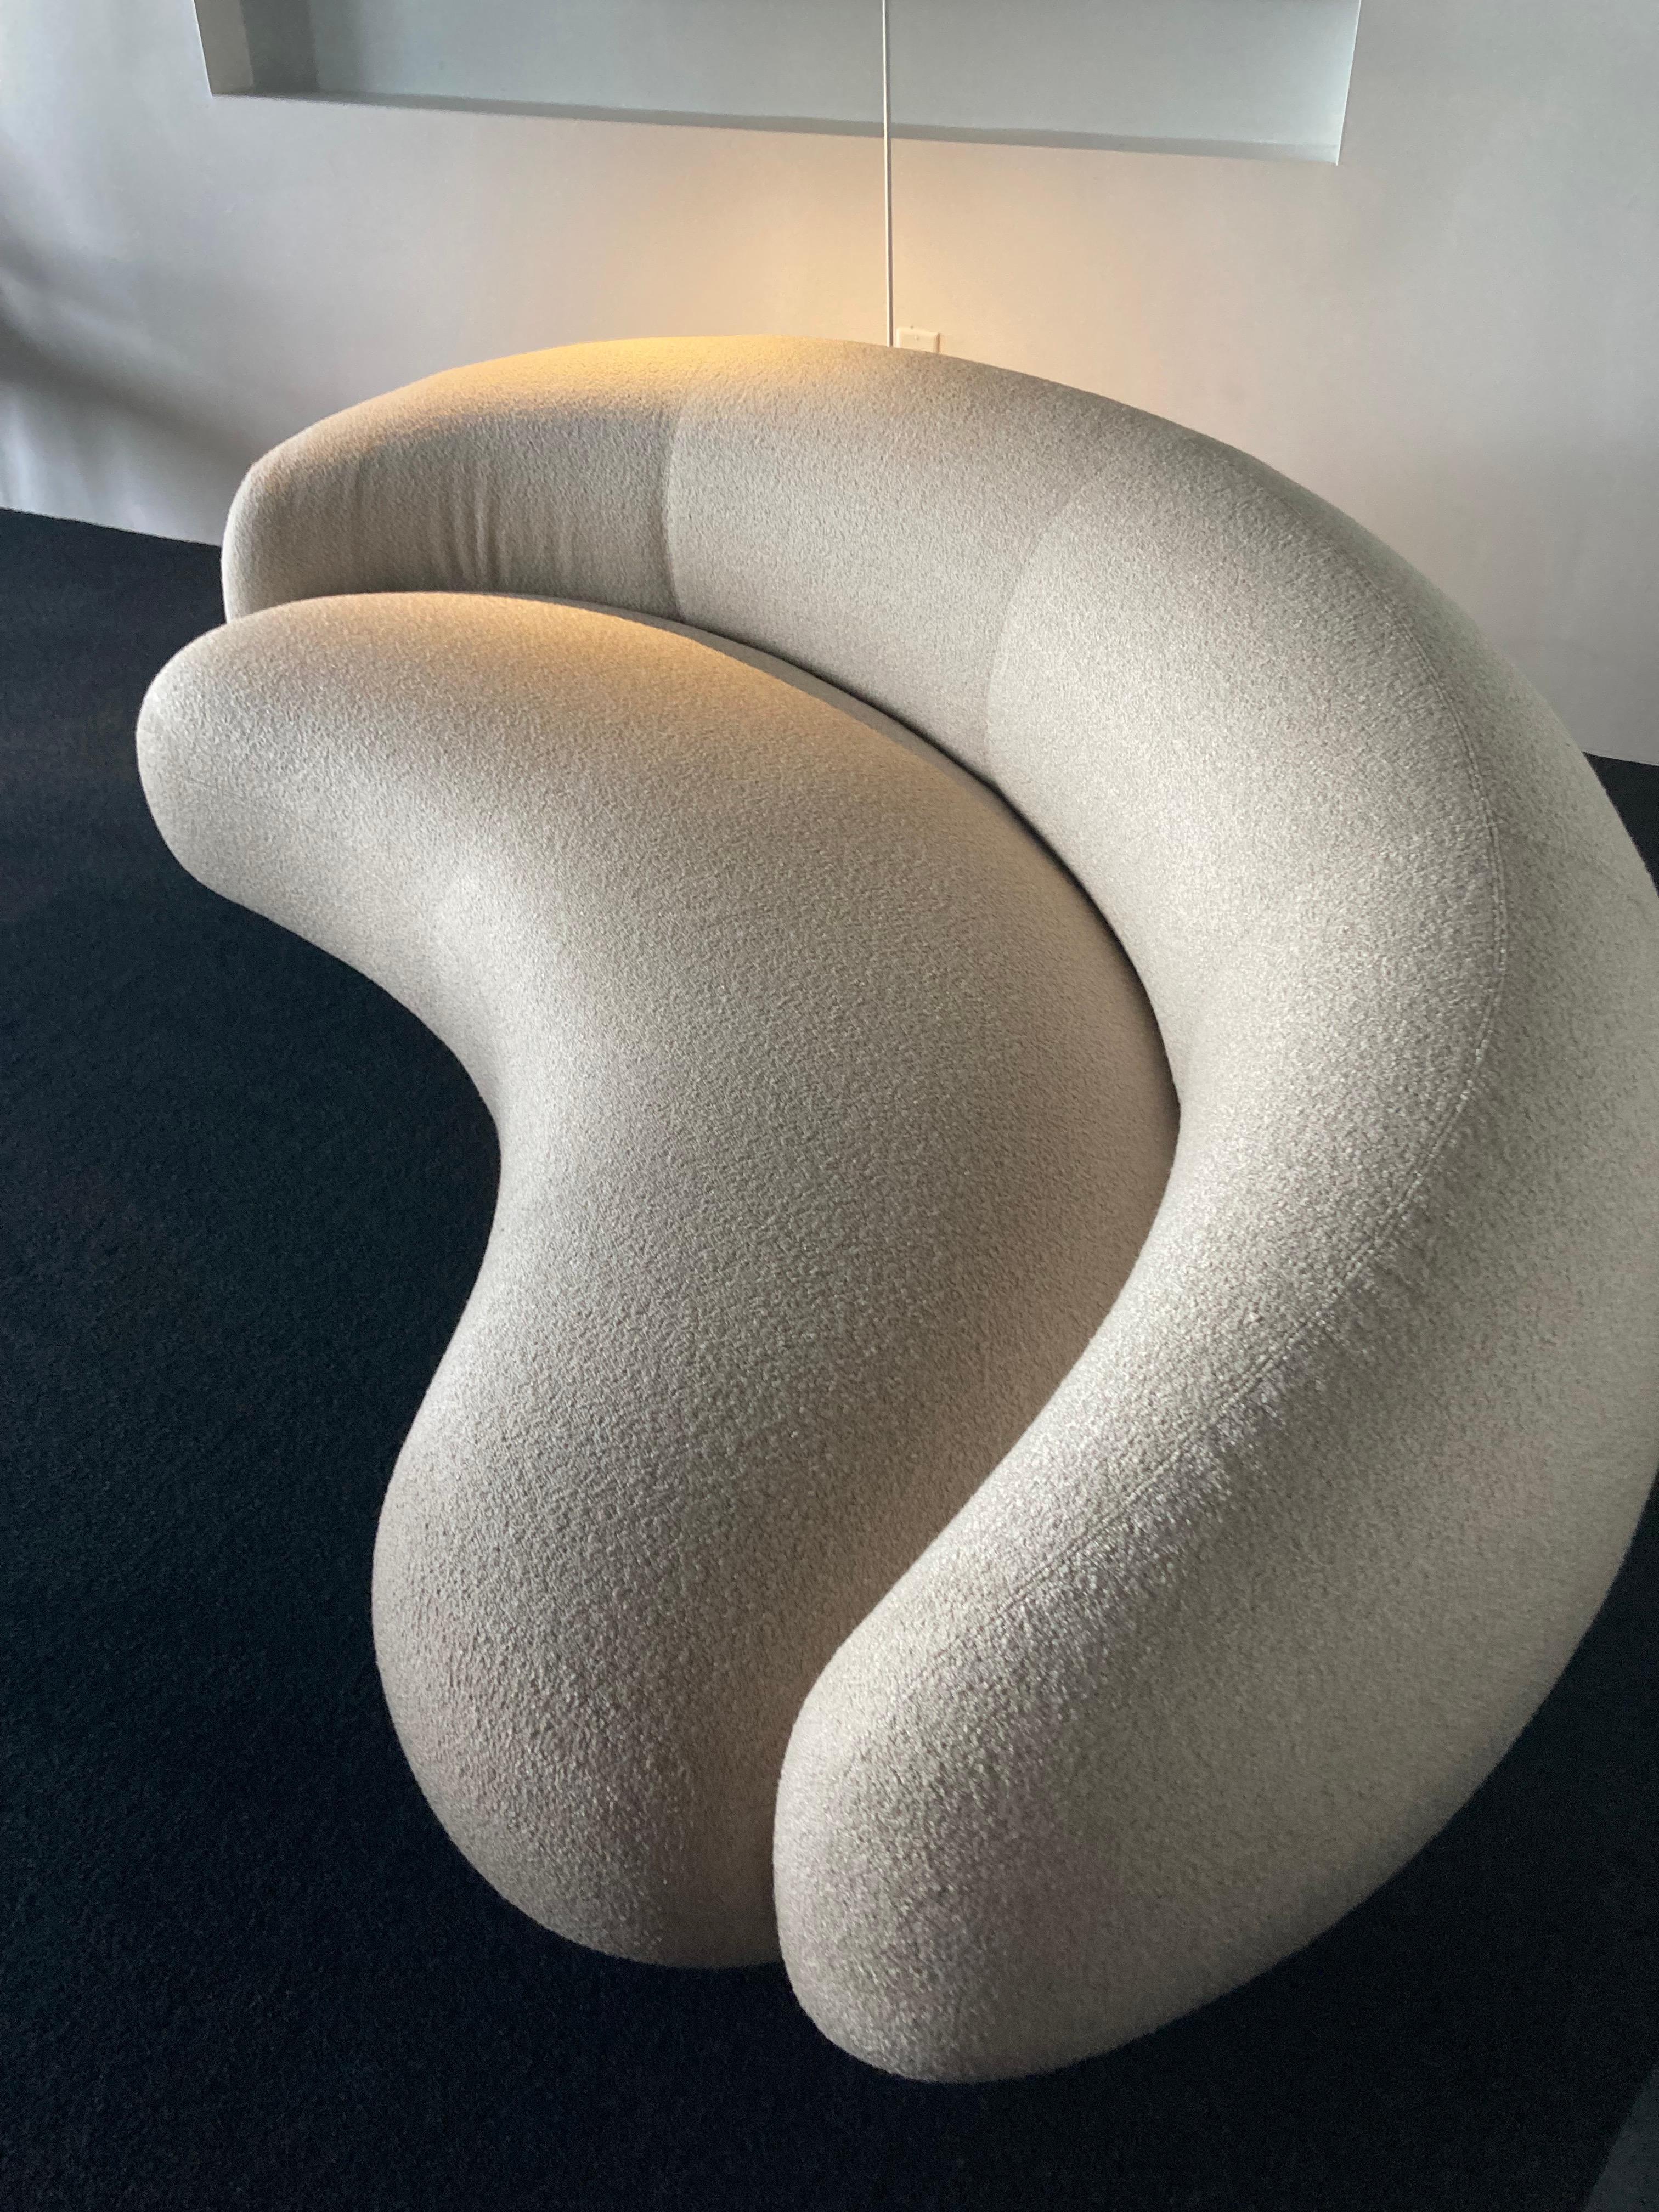 OJUL240 DIONEA02
Soft, enveloping shapes characterize this family of upholstered pieces. Julep is influenced by the 1950s Avant-Garde movement, drawing upon its simplicity and grandeur, refined by a contemporary, romantic, feminine allure. Star of